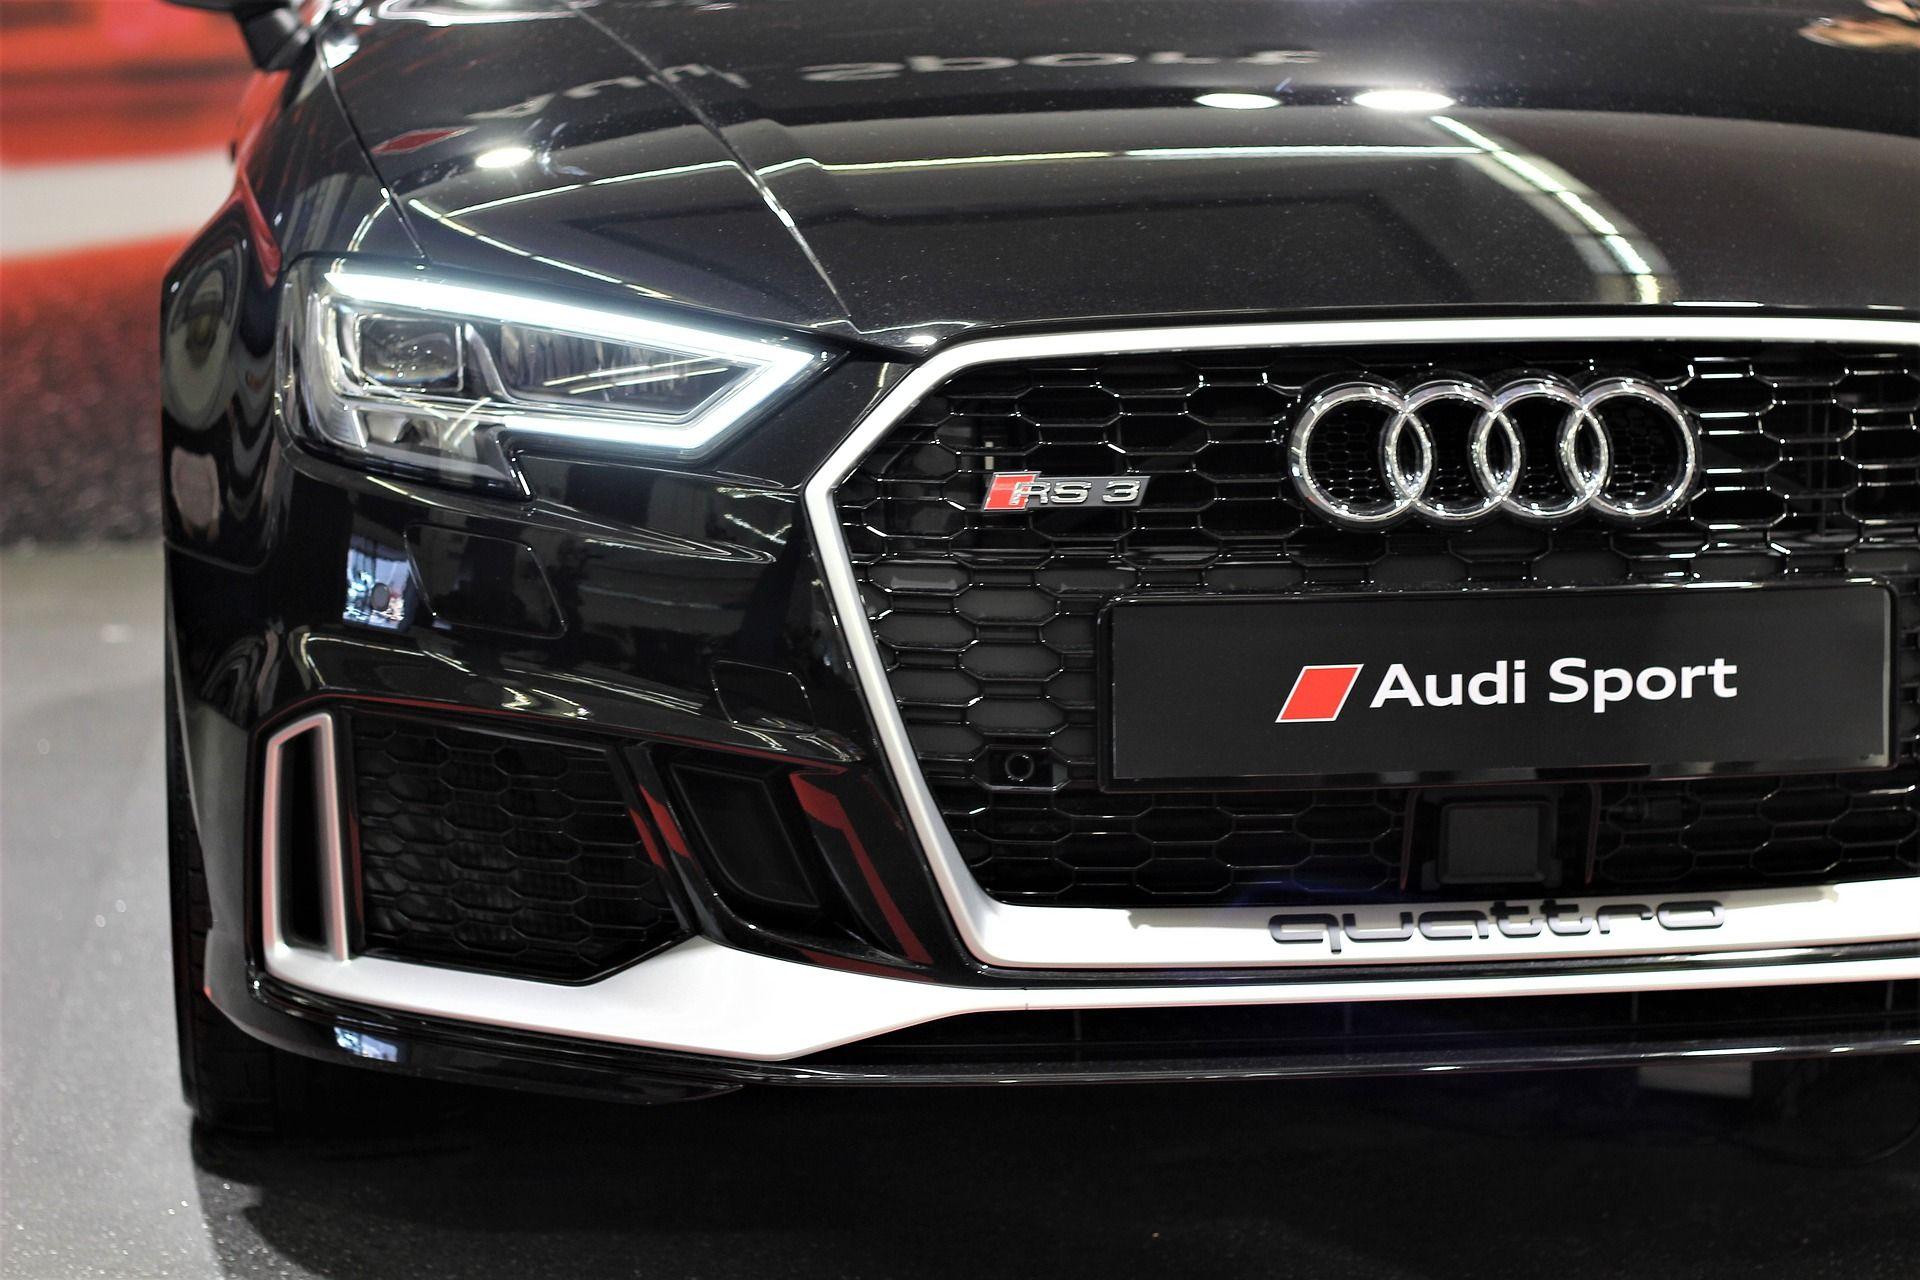 Audi RS3 Wallpaper Free Audi RS3 Background